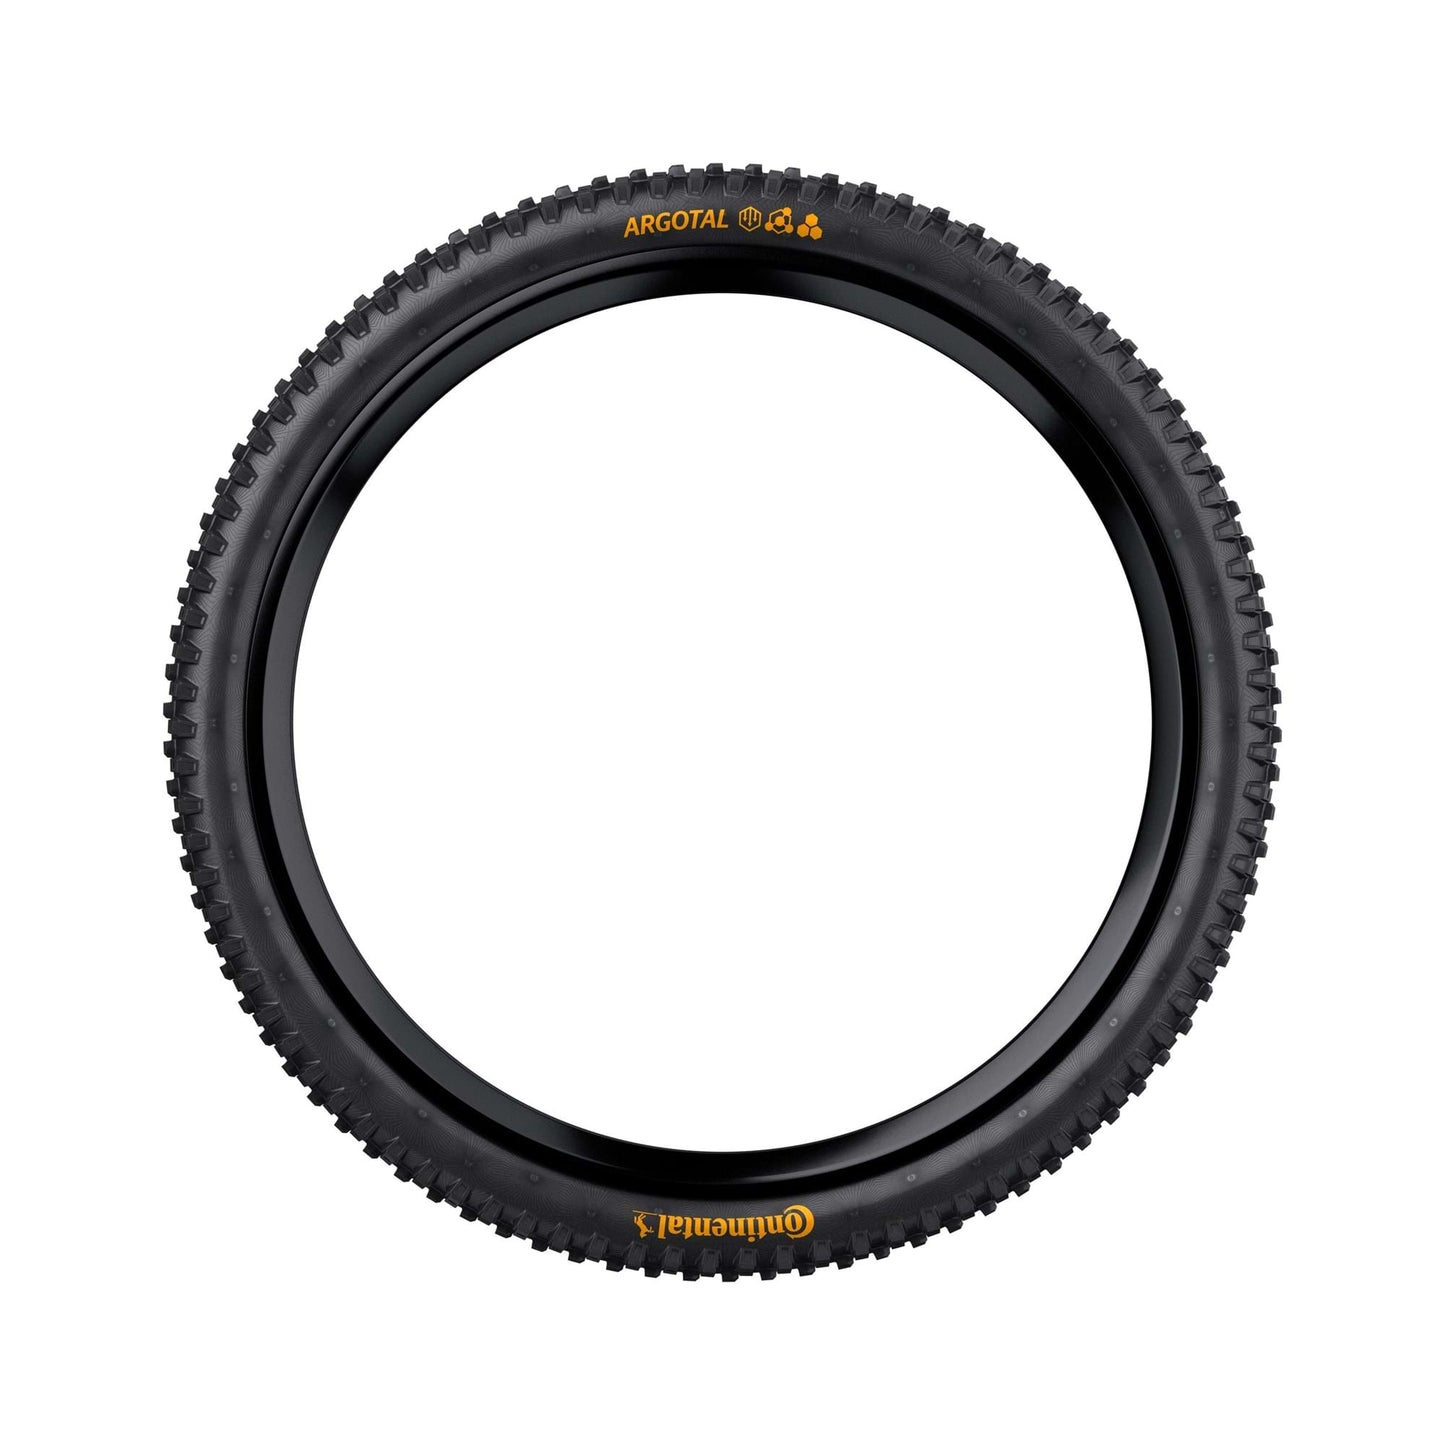 CONTINENTAL ARGOTAL DOWNHILL TYRE - SUPERSOFT COMPOUND FOLDABLE - 27.5X2.40"